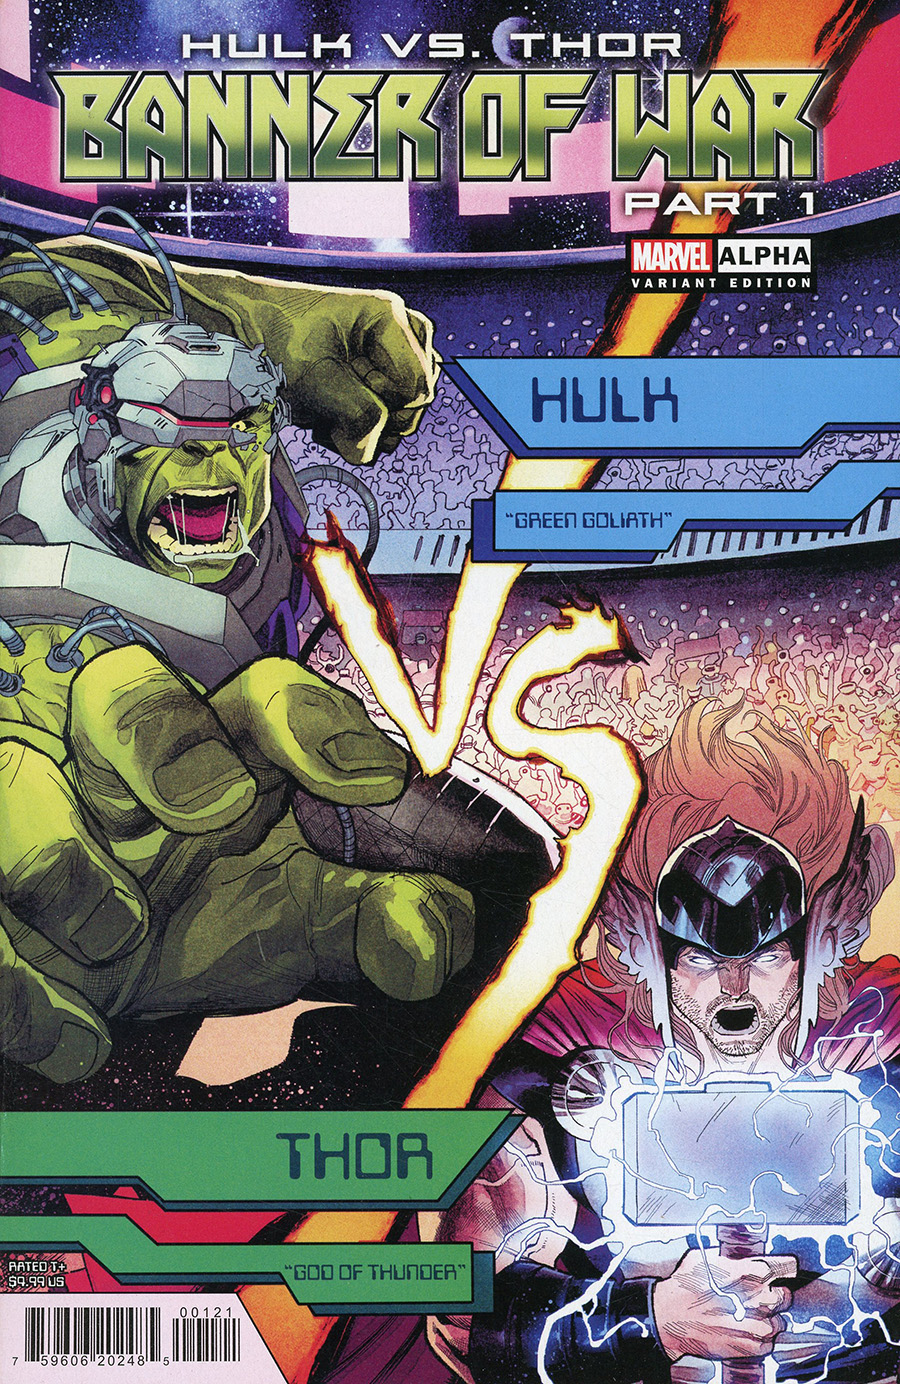 Hulk vs Thor Banner Of War Alpha #1 (One Shot) Cover F Incentive Martin Coccolo Variant Cover (Banner Of War Part 1)